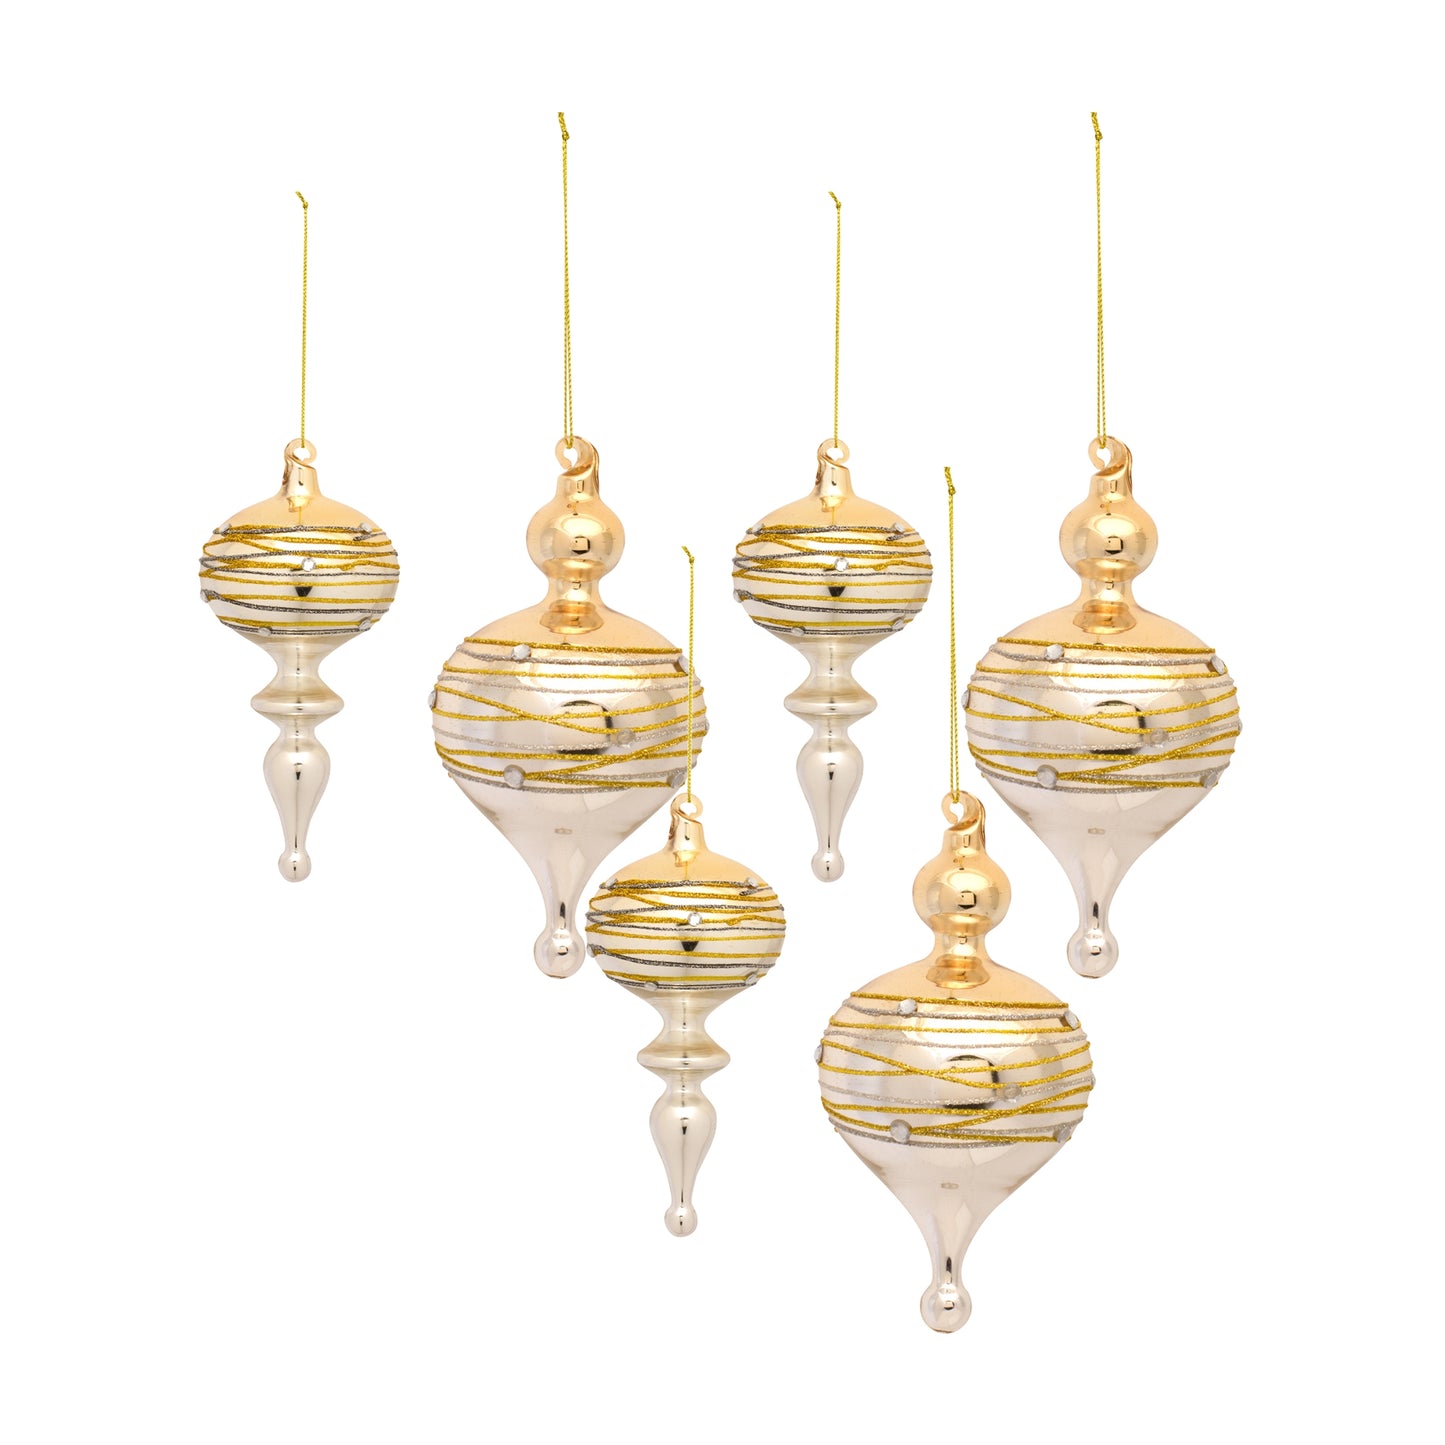 Modern Gold Ombre Finial Ornament with Bead Accent (Set of 6)